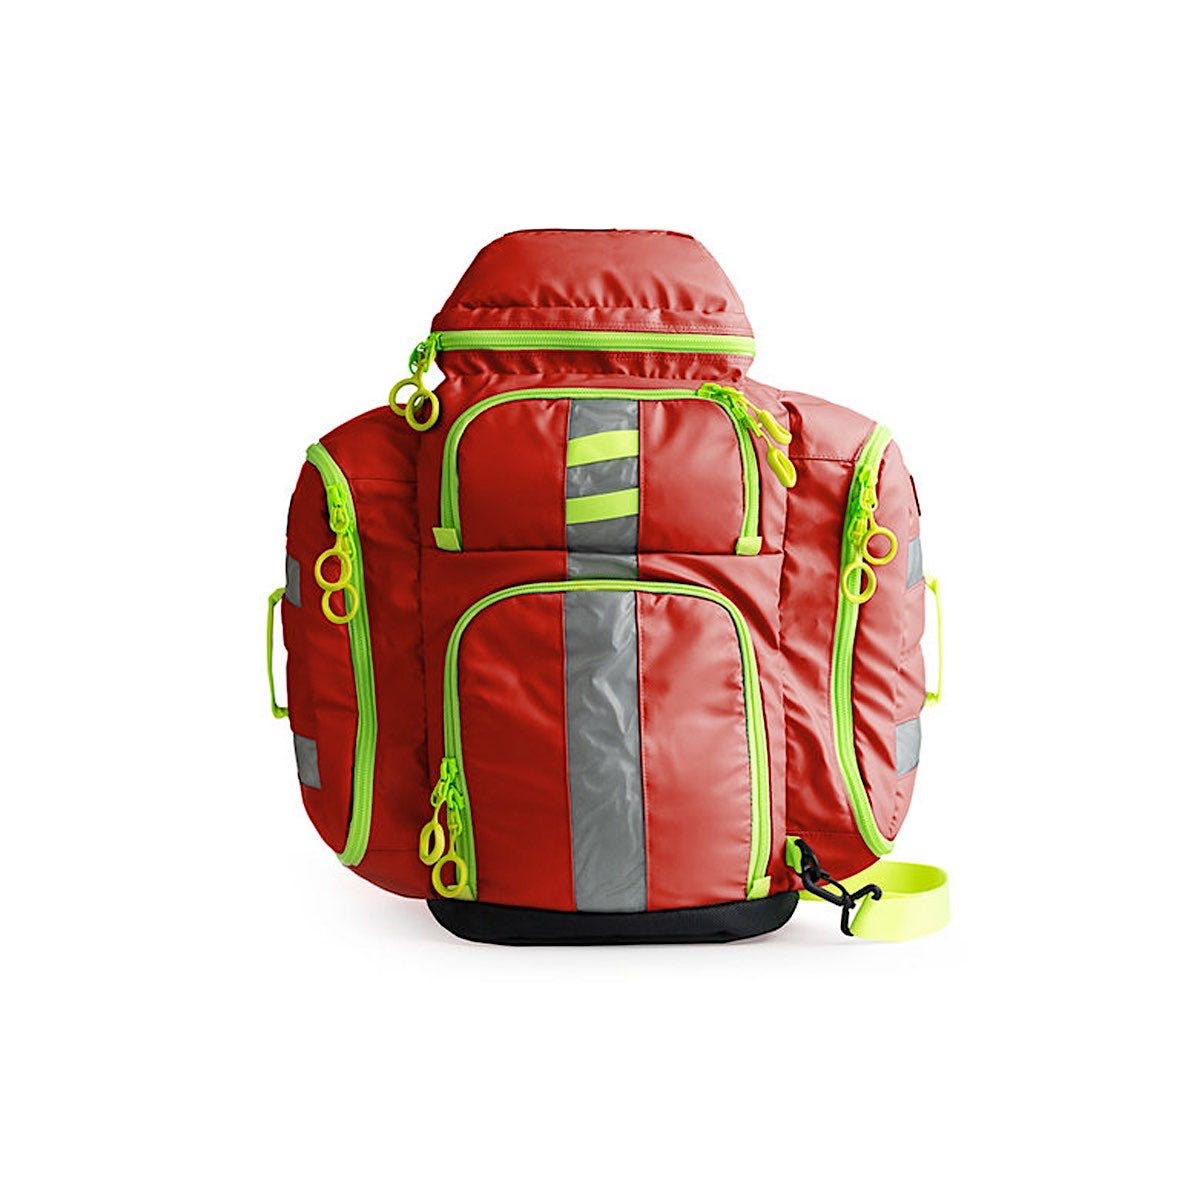 Statpacks G3 Perfusion, Red